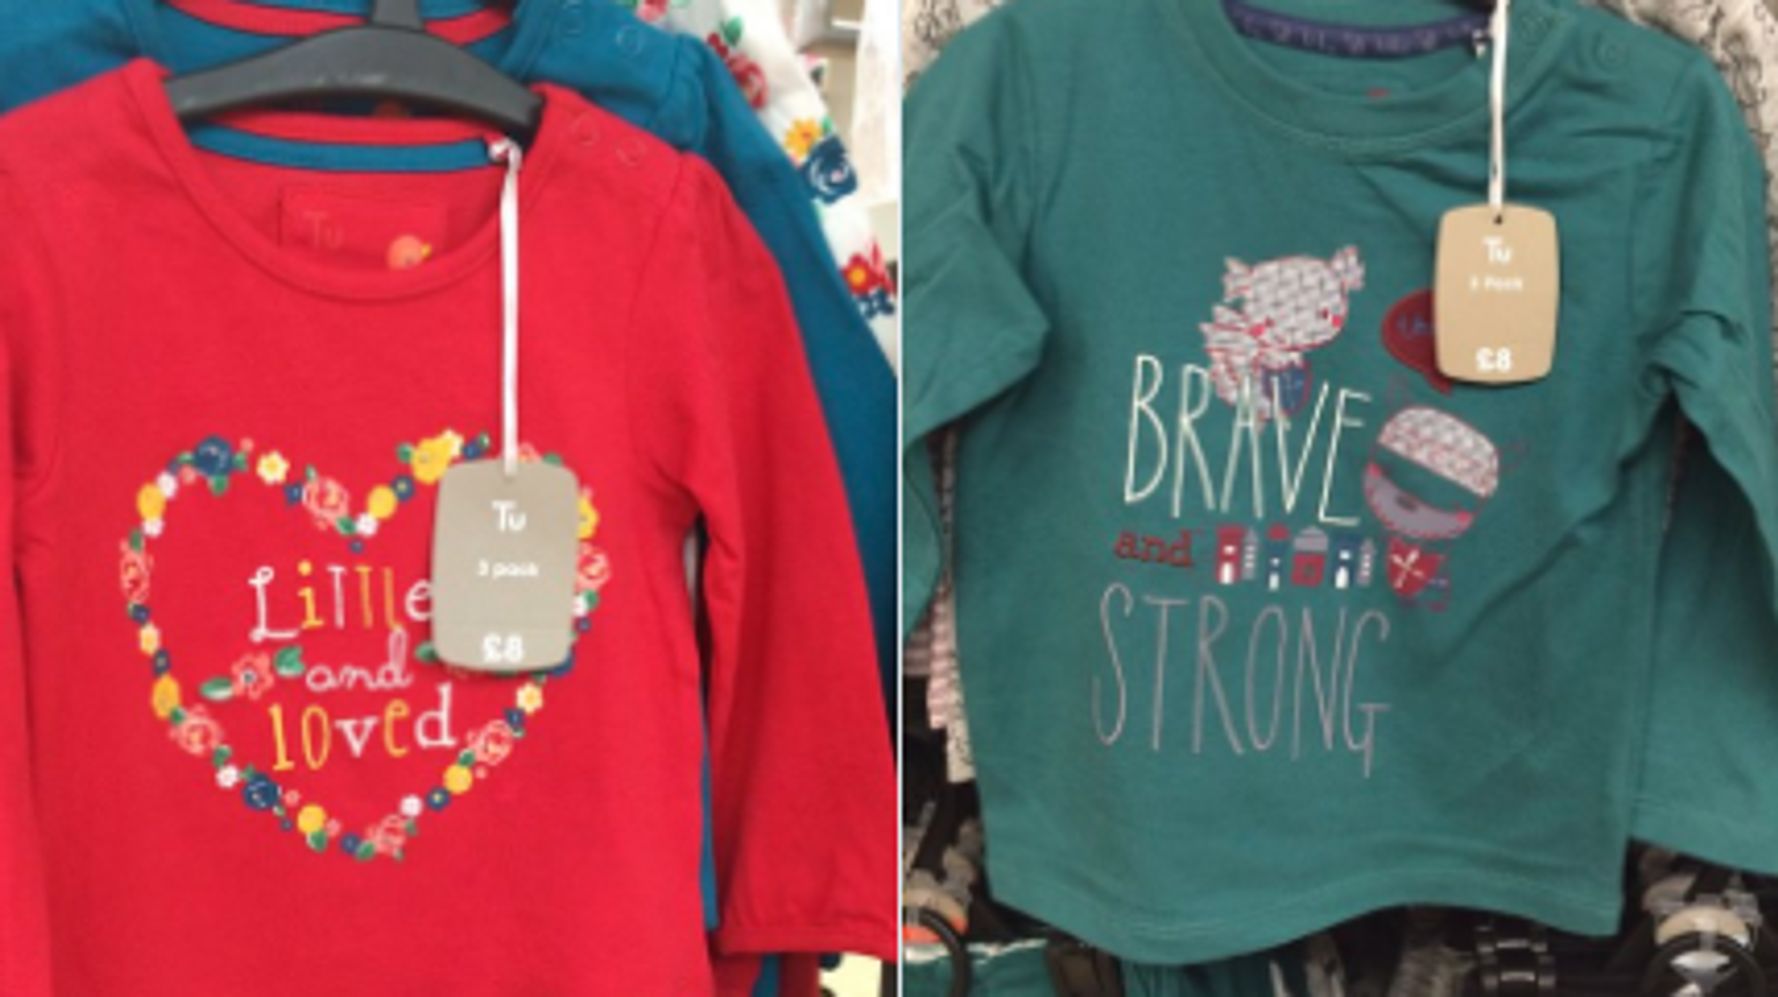 Parents Outraged At Sainsbury's 'Sexist' Slogans On Children's T-Shirts ...